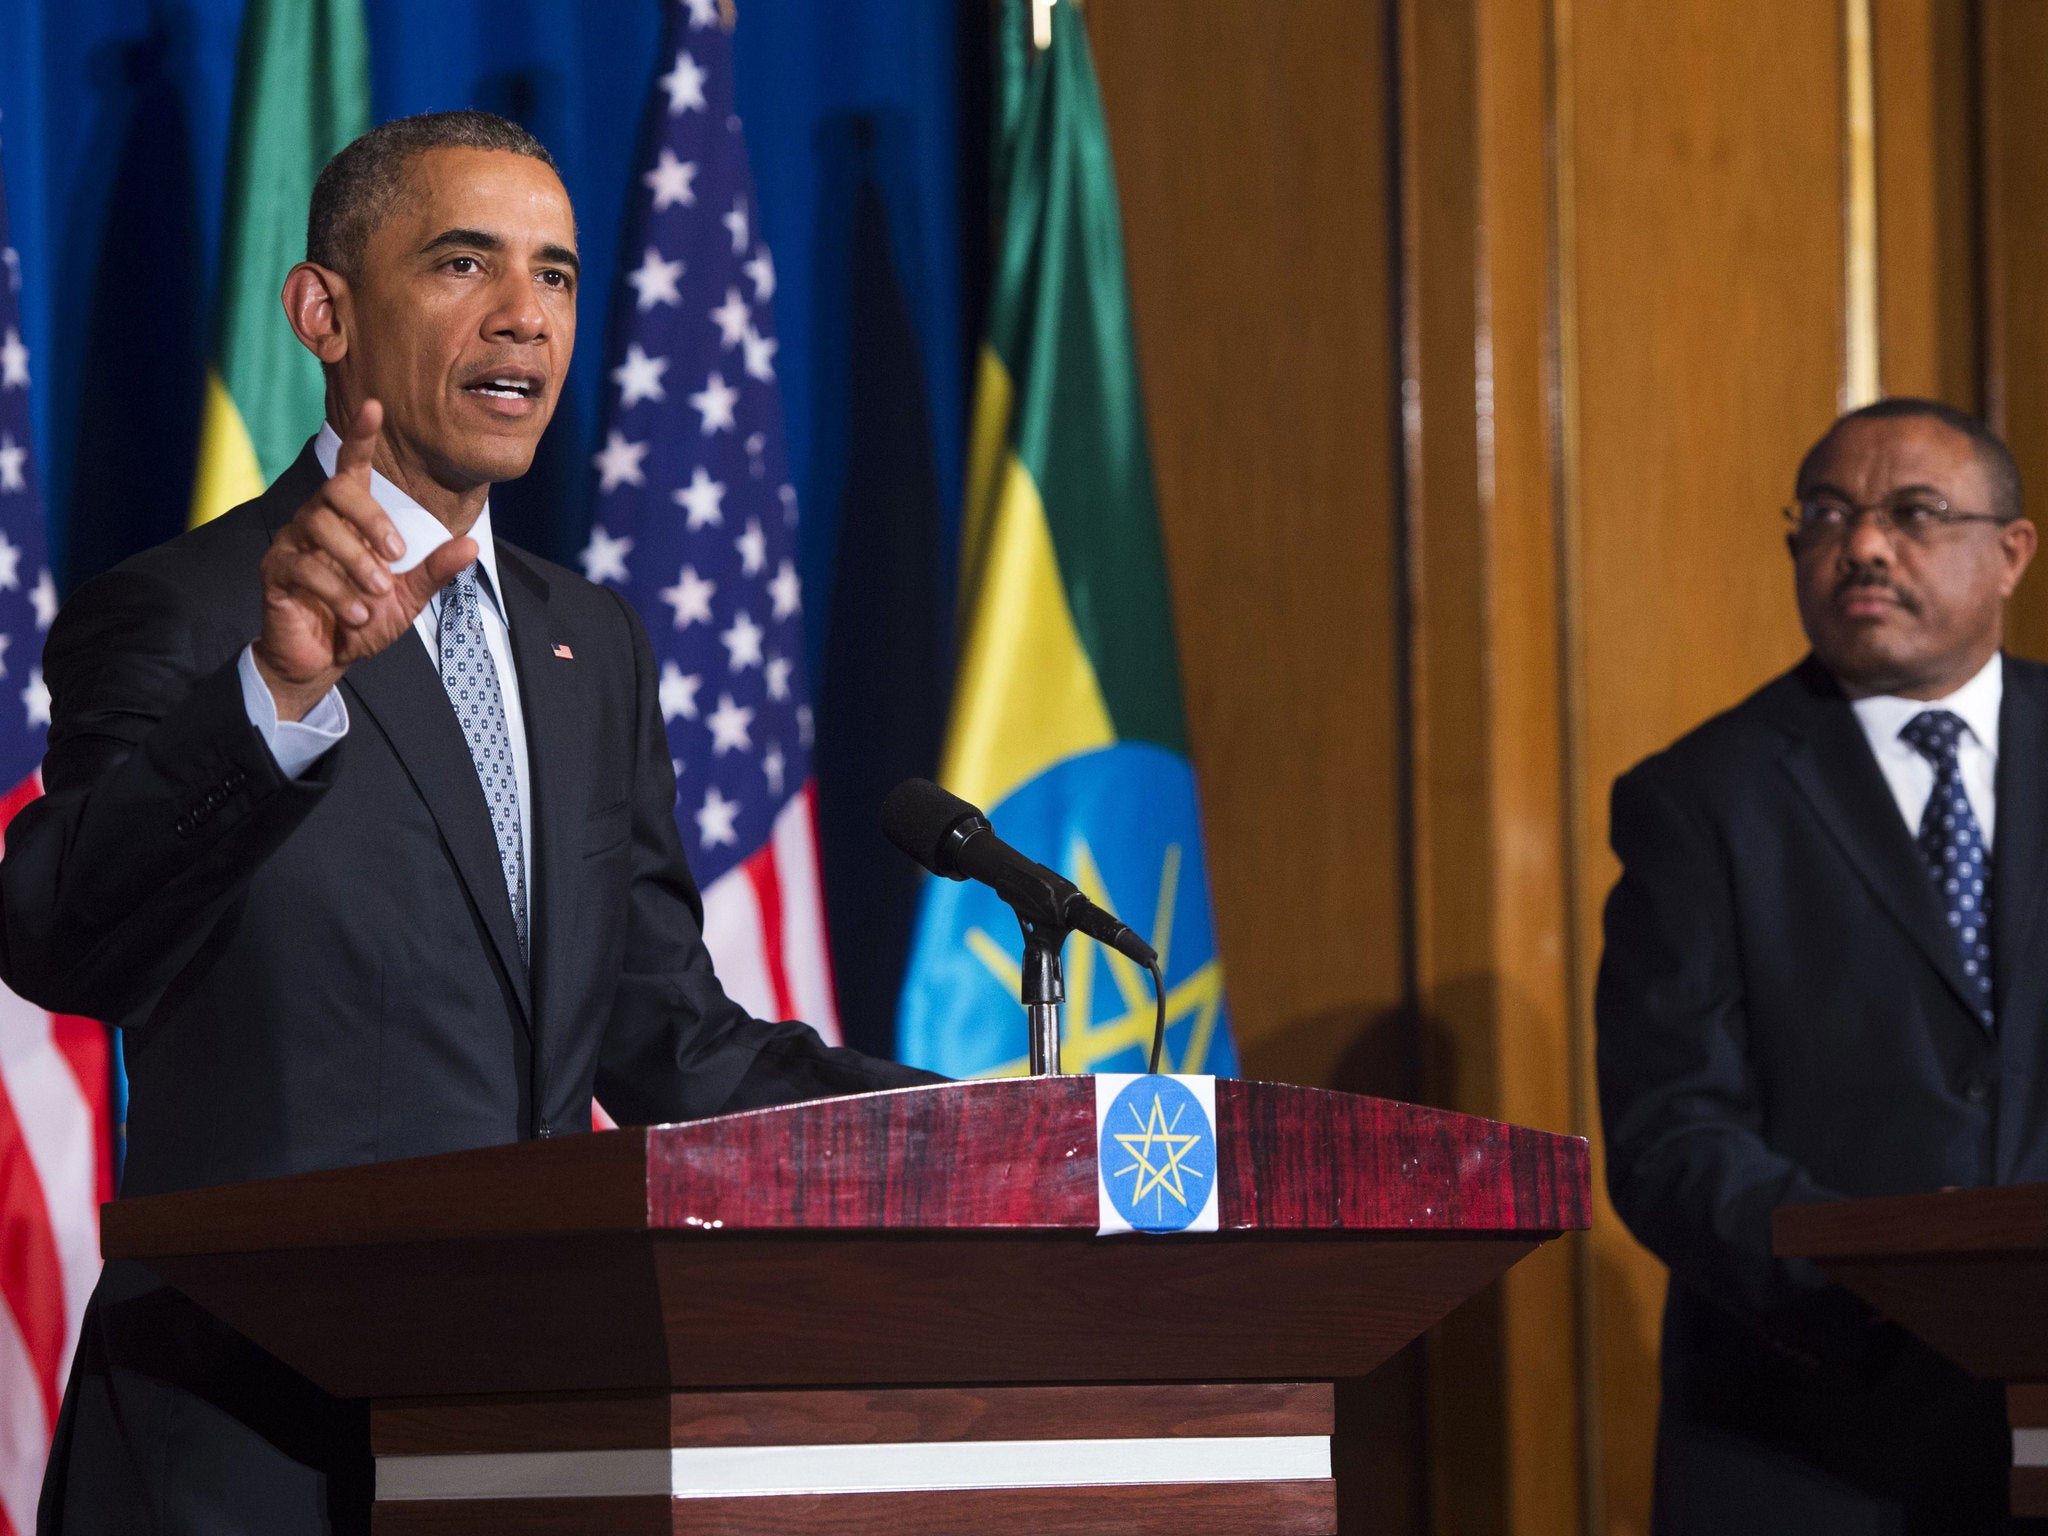 President Obama at a joint press conference with Ethiopian Prime Minister Hailemariam.